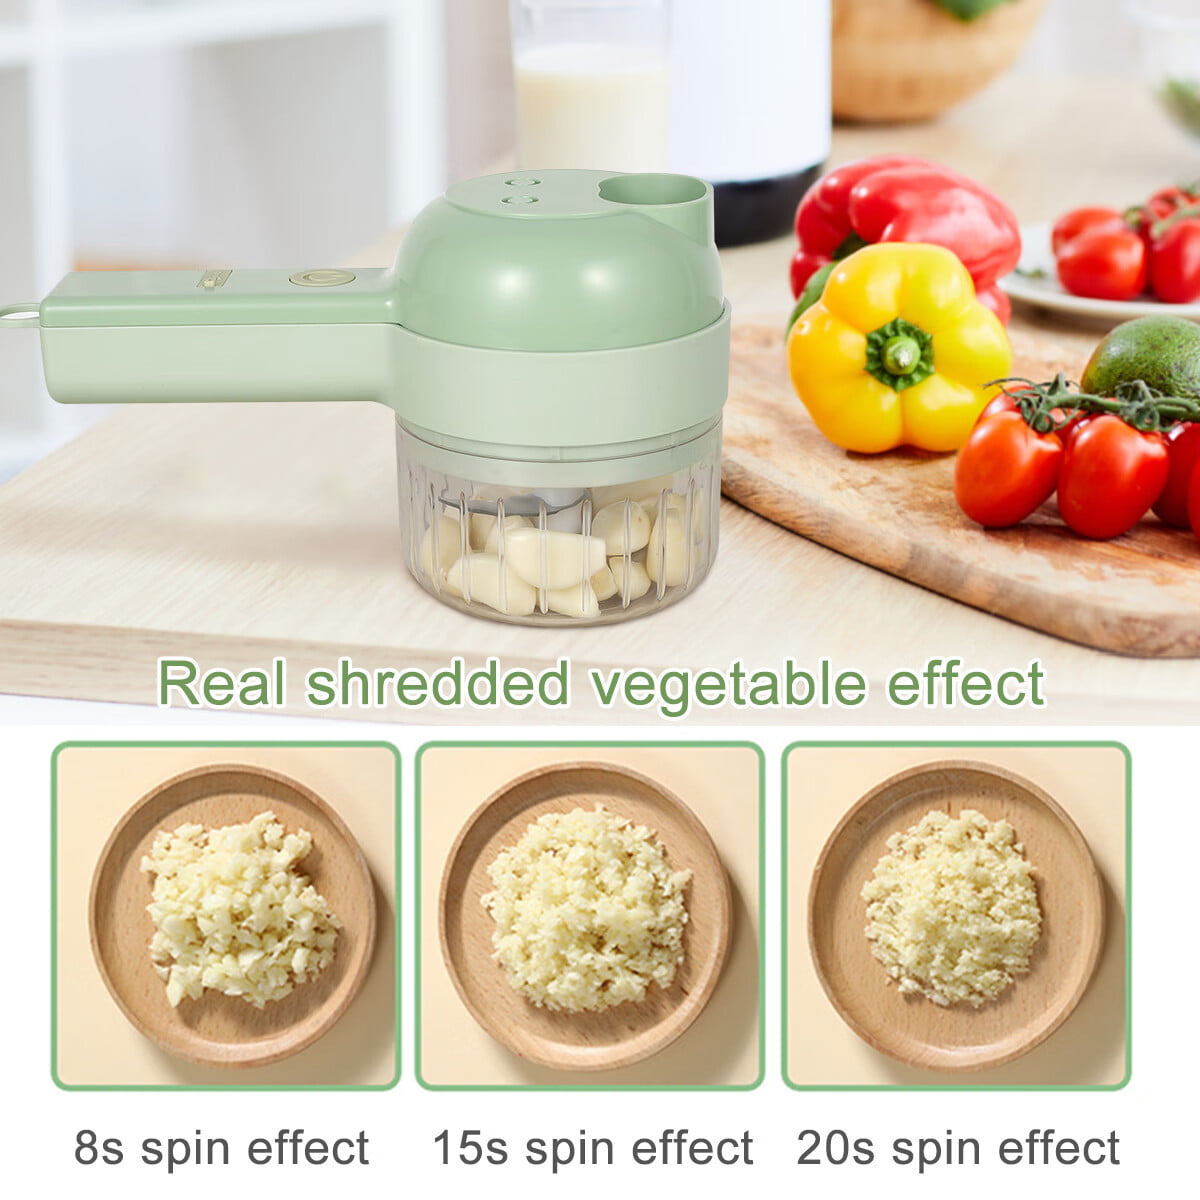 Wireless Electric Vegetable Chopper, 3-in-1 Professional Cheese